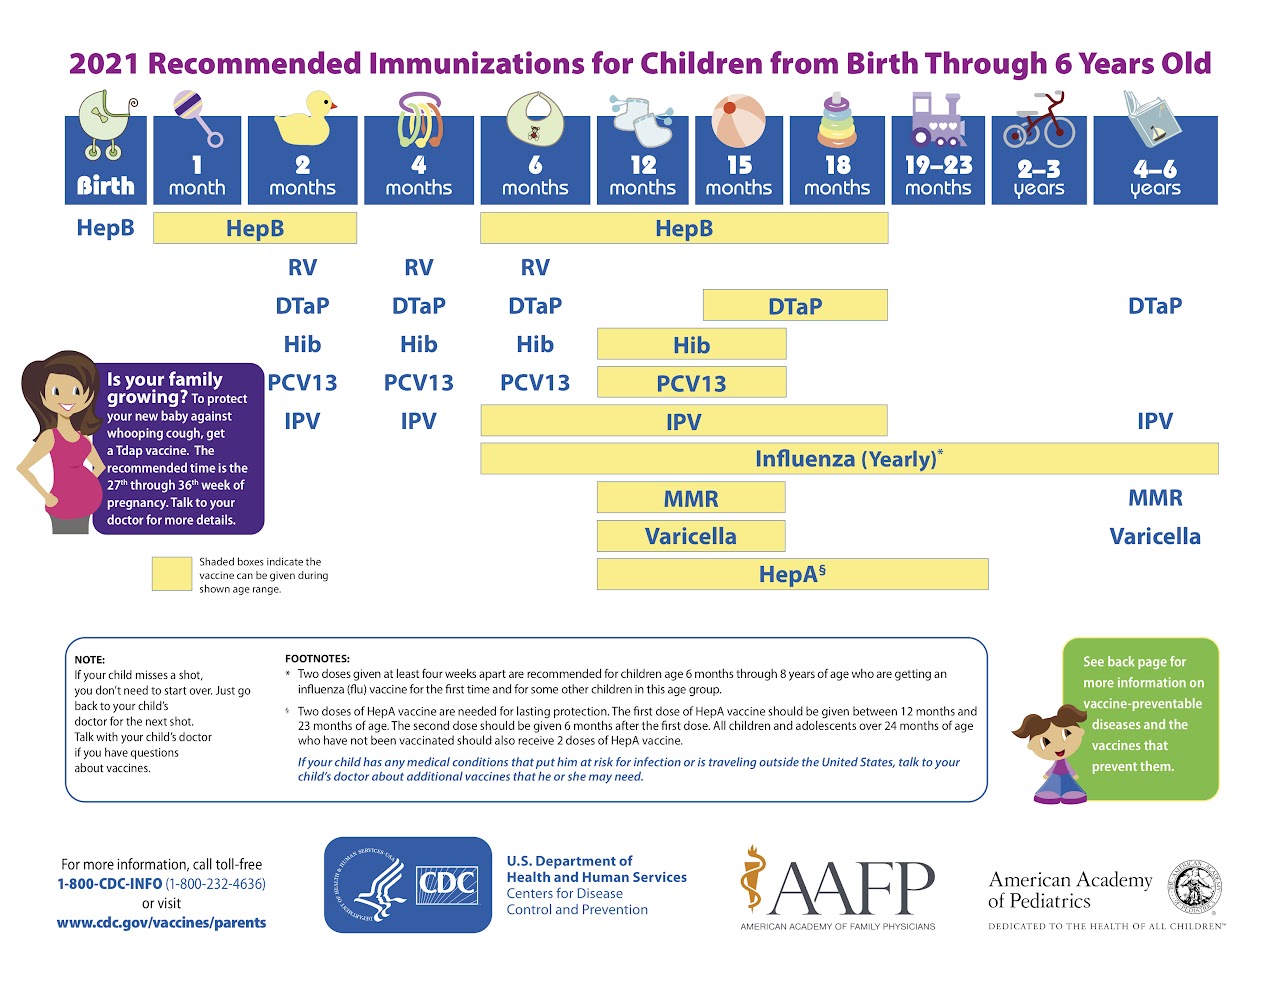 2021 Recommended Immunization for Children from Birth Through 6 years old